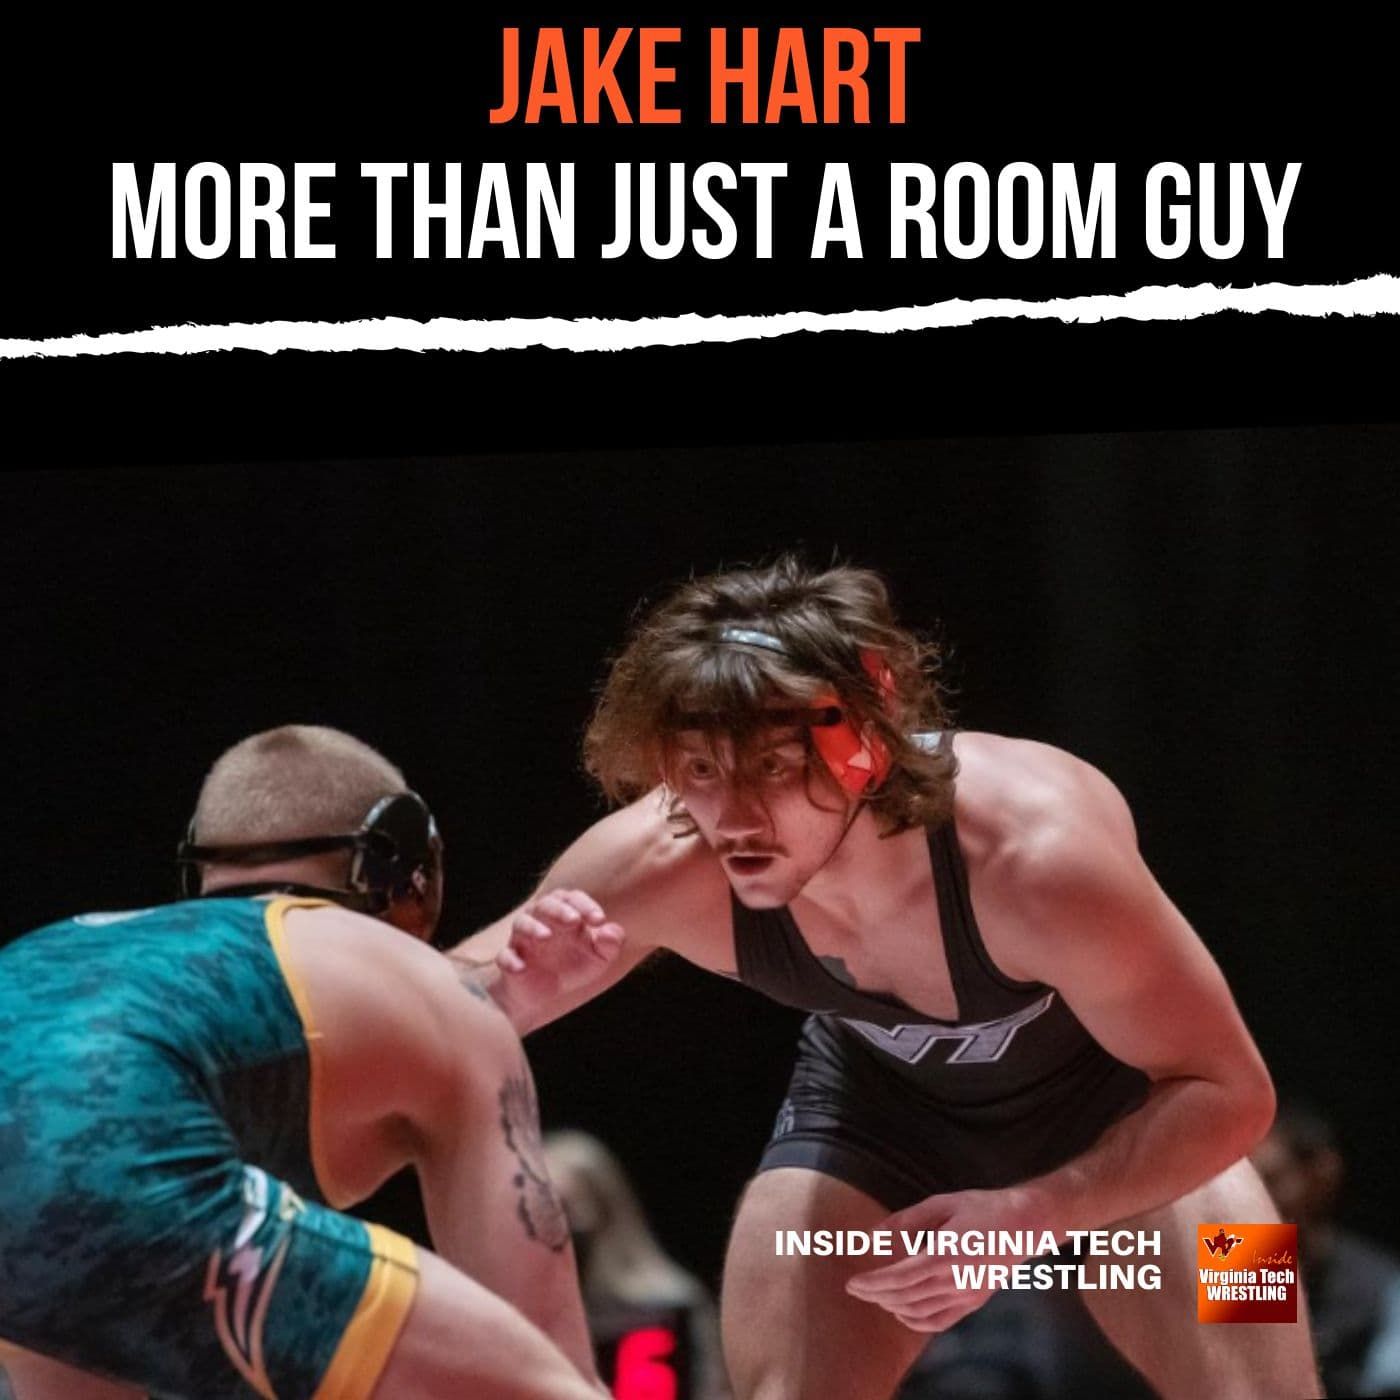 Jake Hart ready to tell wrestling’s stories, his way - VT114